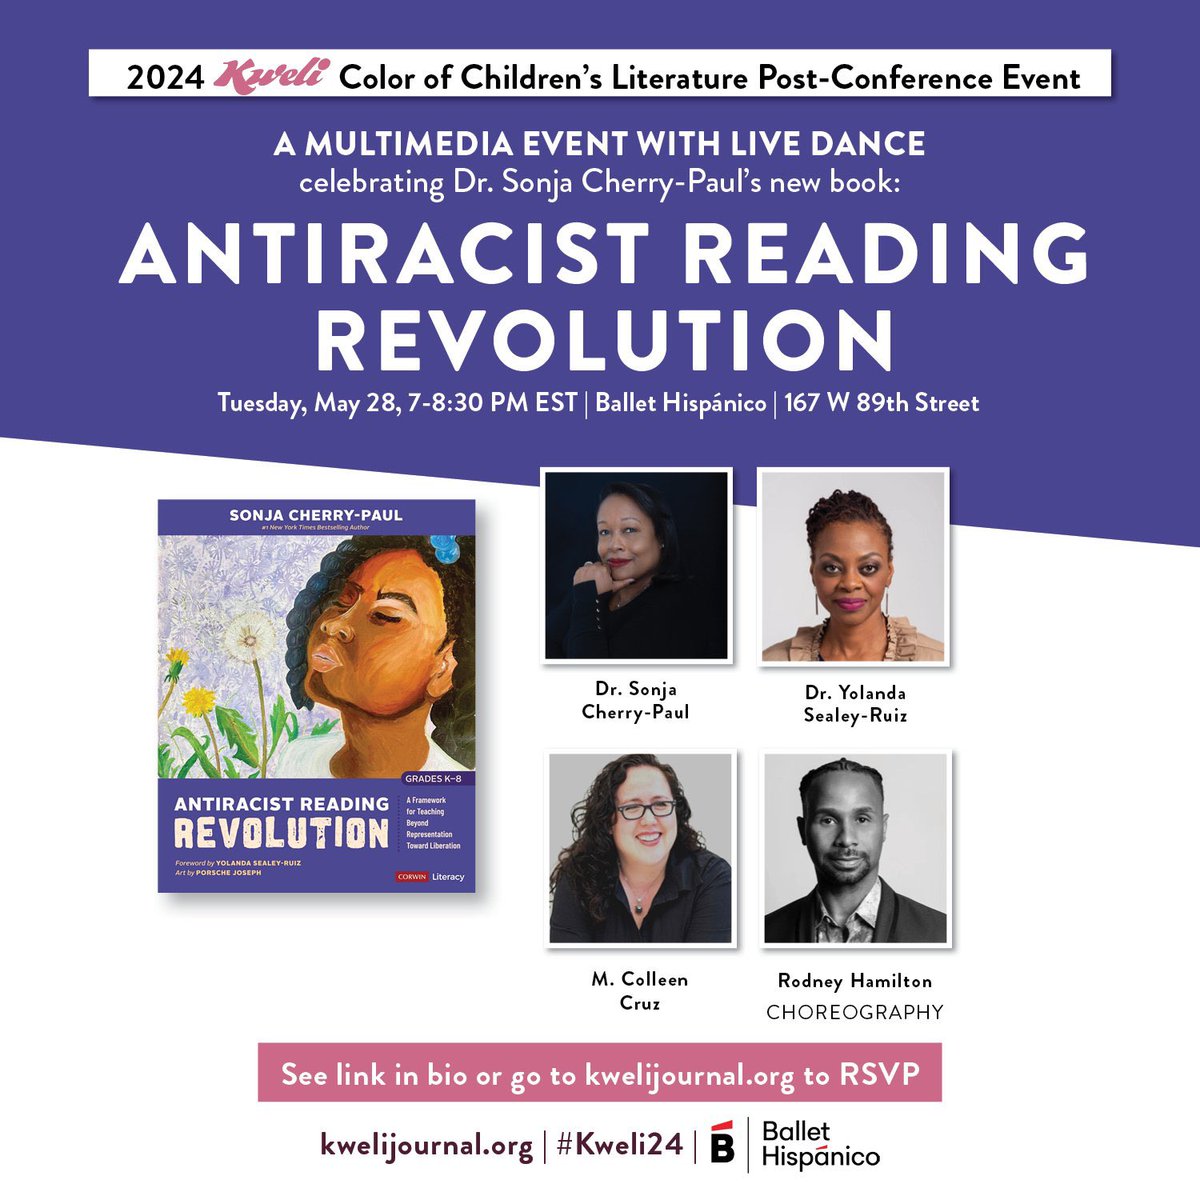 ⏰ There’s still time to join us next Tues, May 28, at @ballethispanico to celebrate the launch of ANTIRACIST READING REVOLUTION (@CorwinPress) by Dr. @SonjaCherryPaul. Event features live dance, reading and conversation w/ @RuizSealey + @colleen_cruz. SIGN UP ➡️ Link in bio.